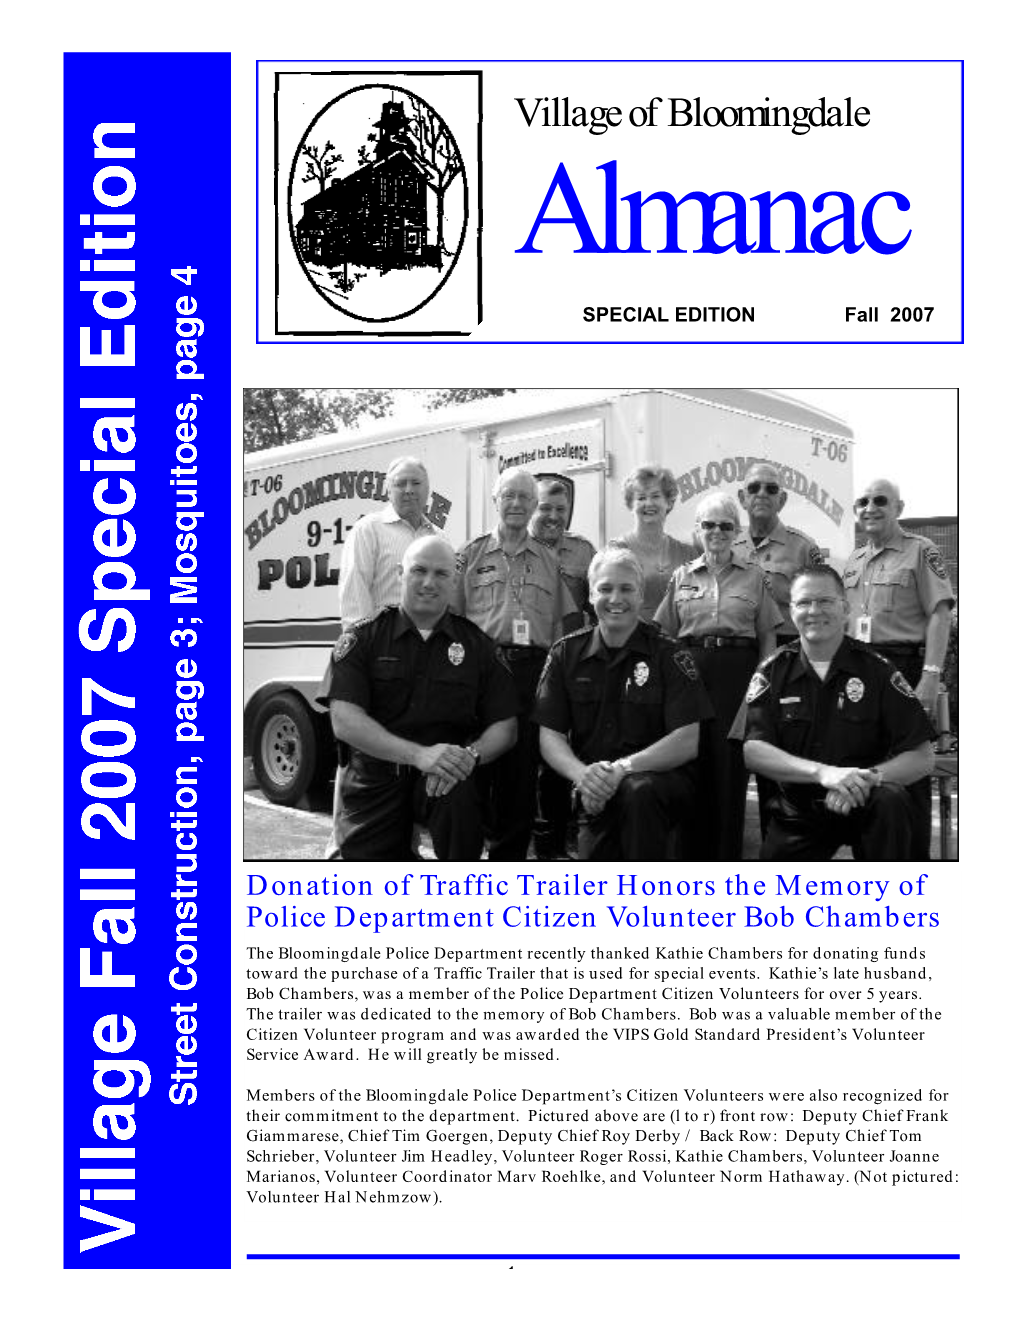 Fall 2007 Special Issue